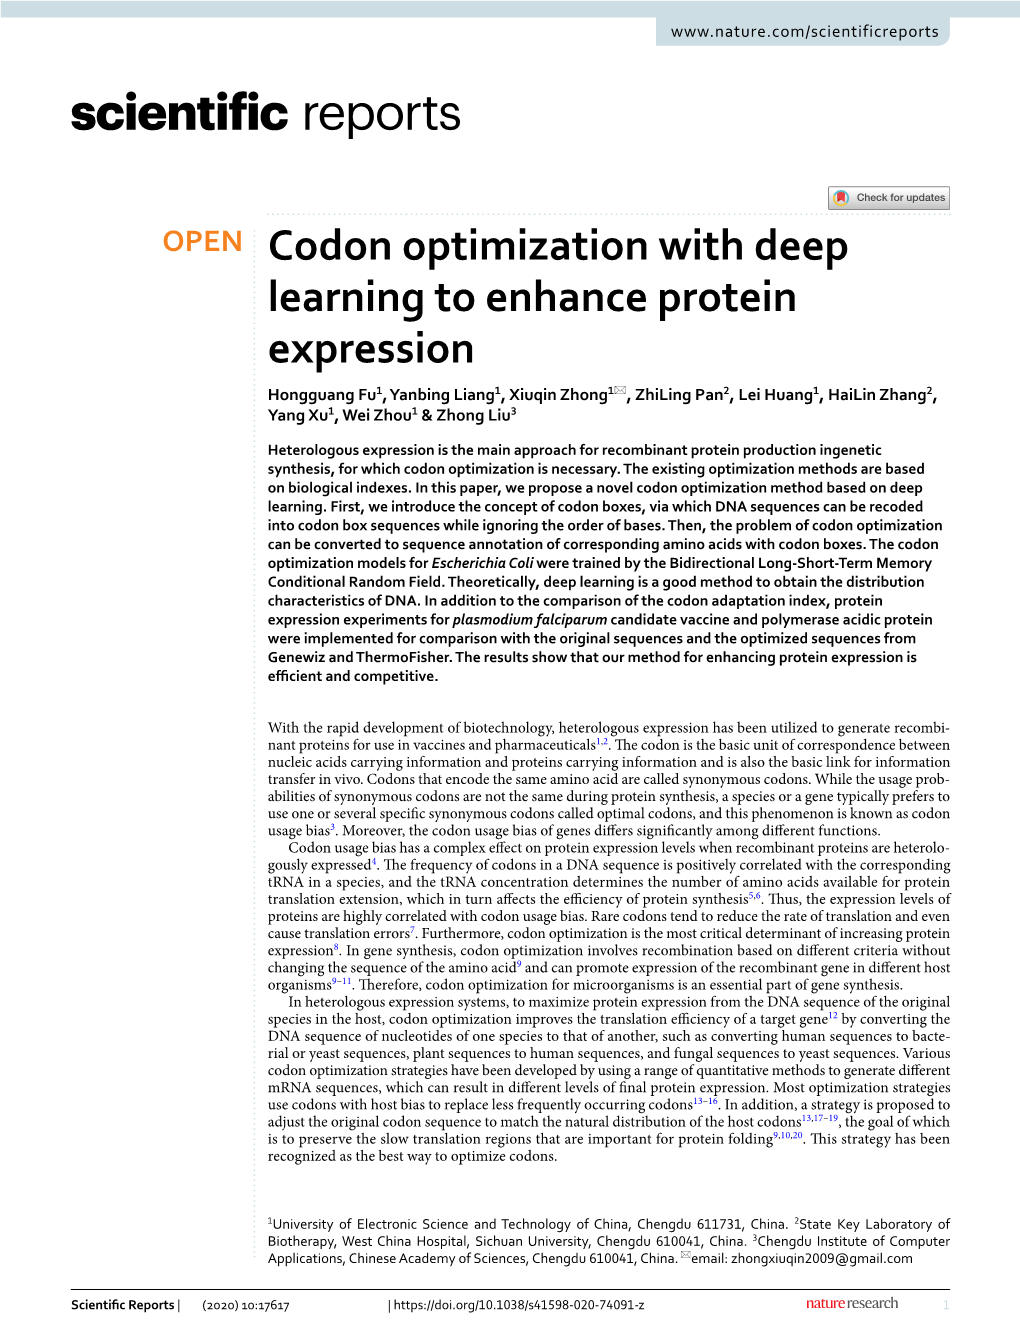 Codon Optimization with Deep Learning to Enhance Protein